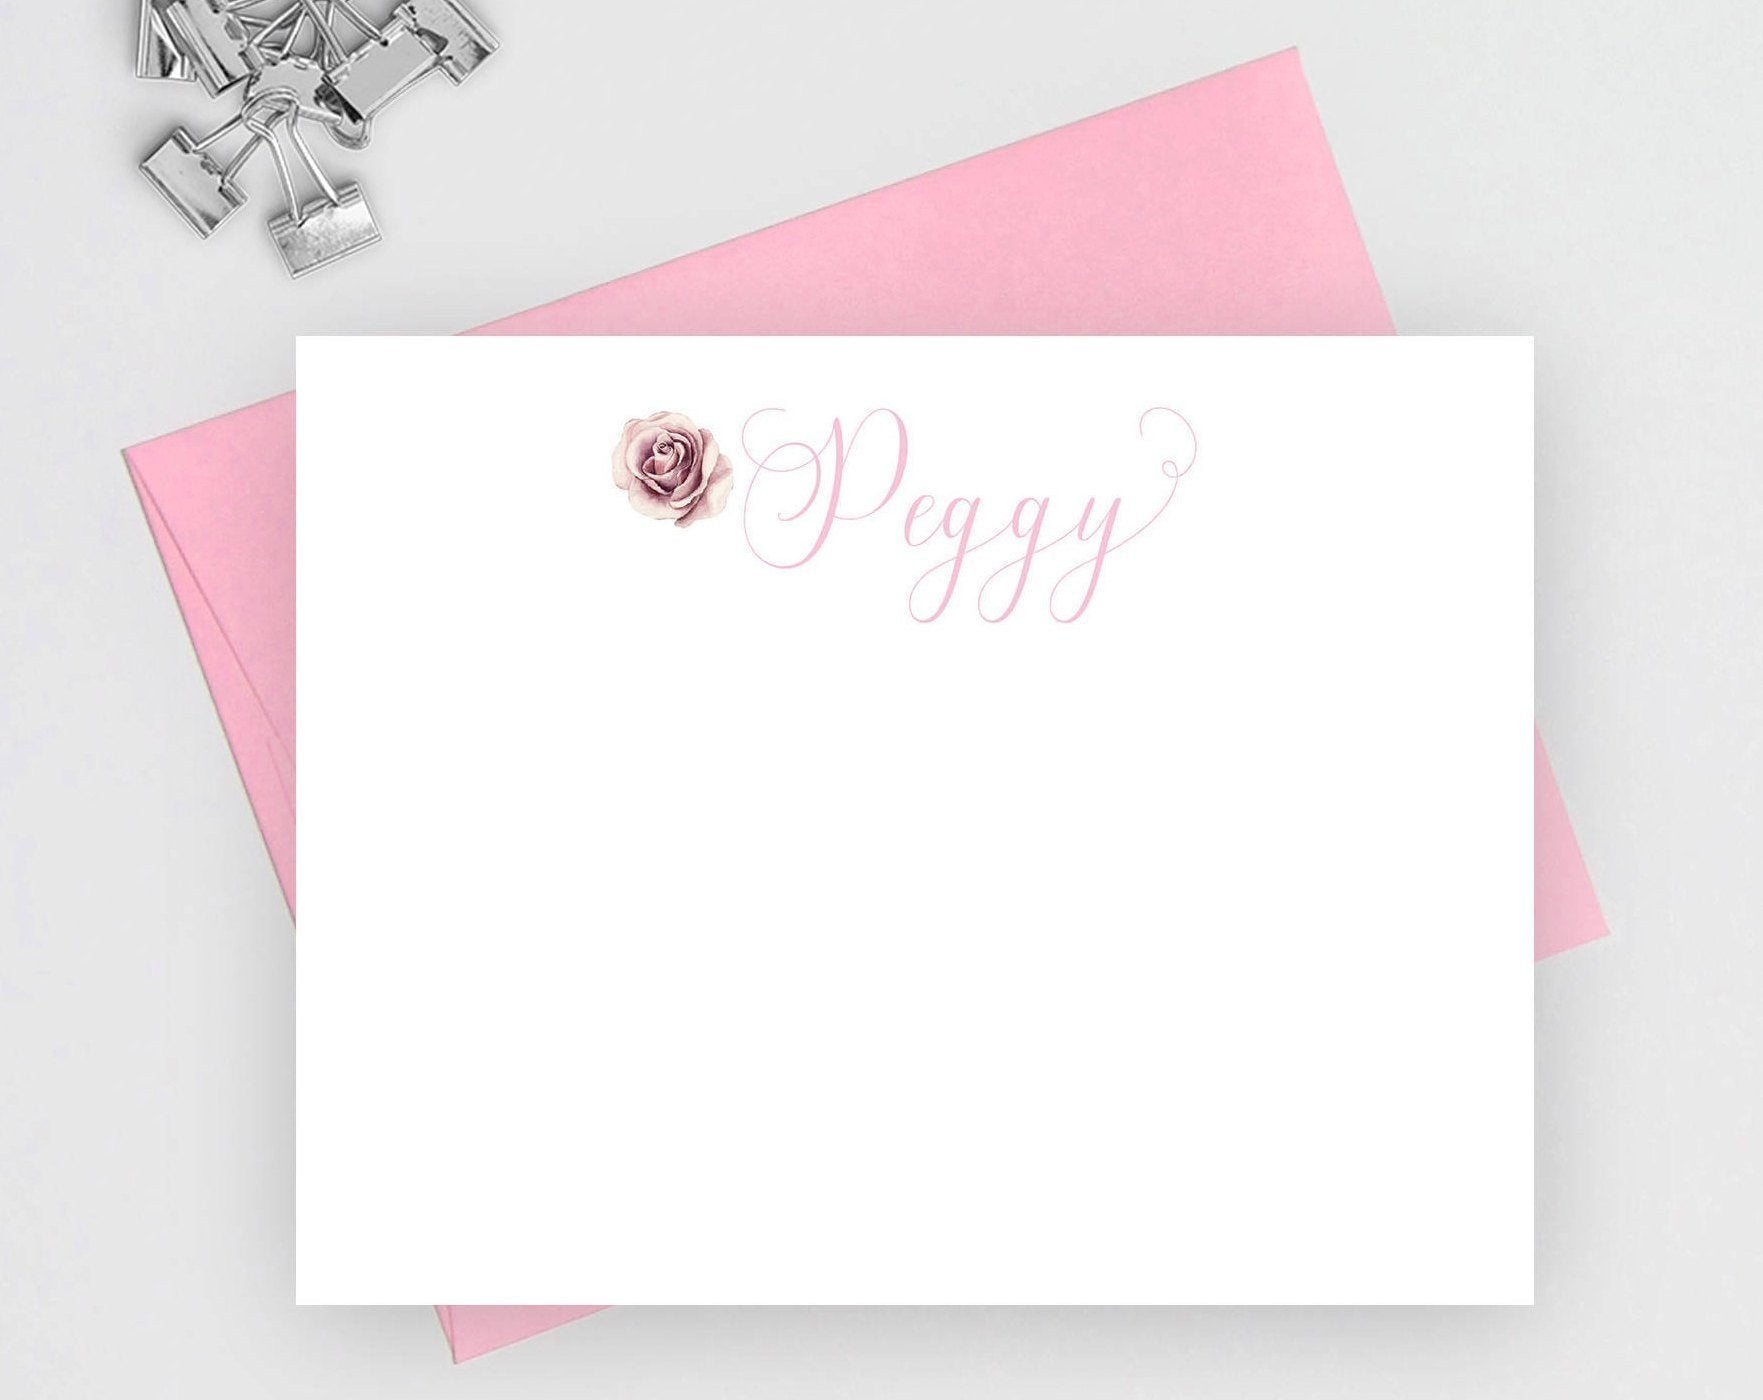 Rose Personalized Stationery Set For Women, Rose Note Cards